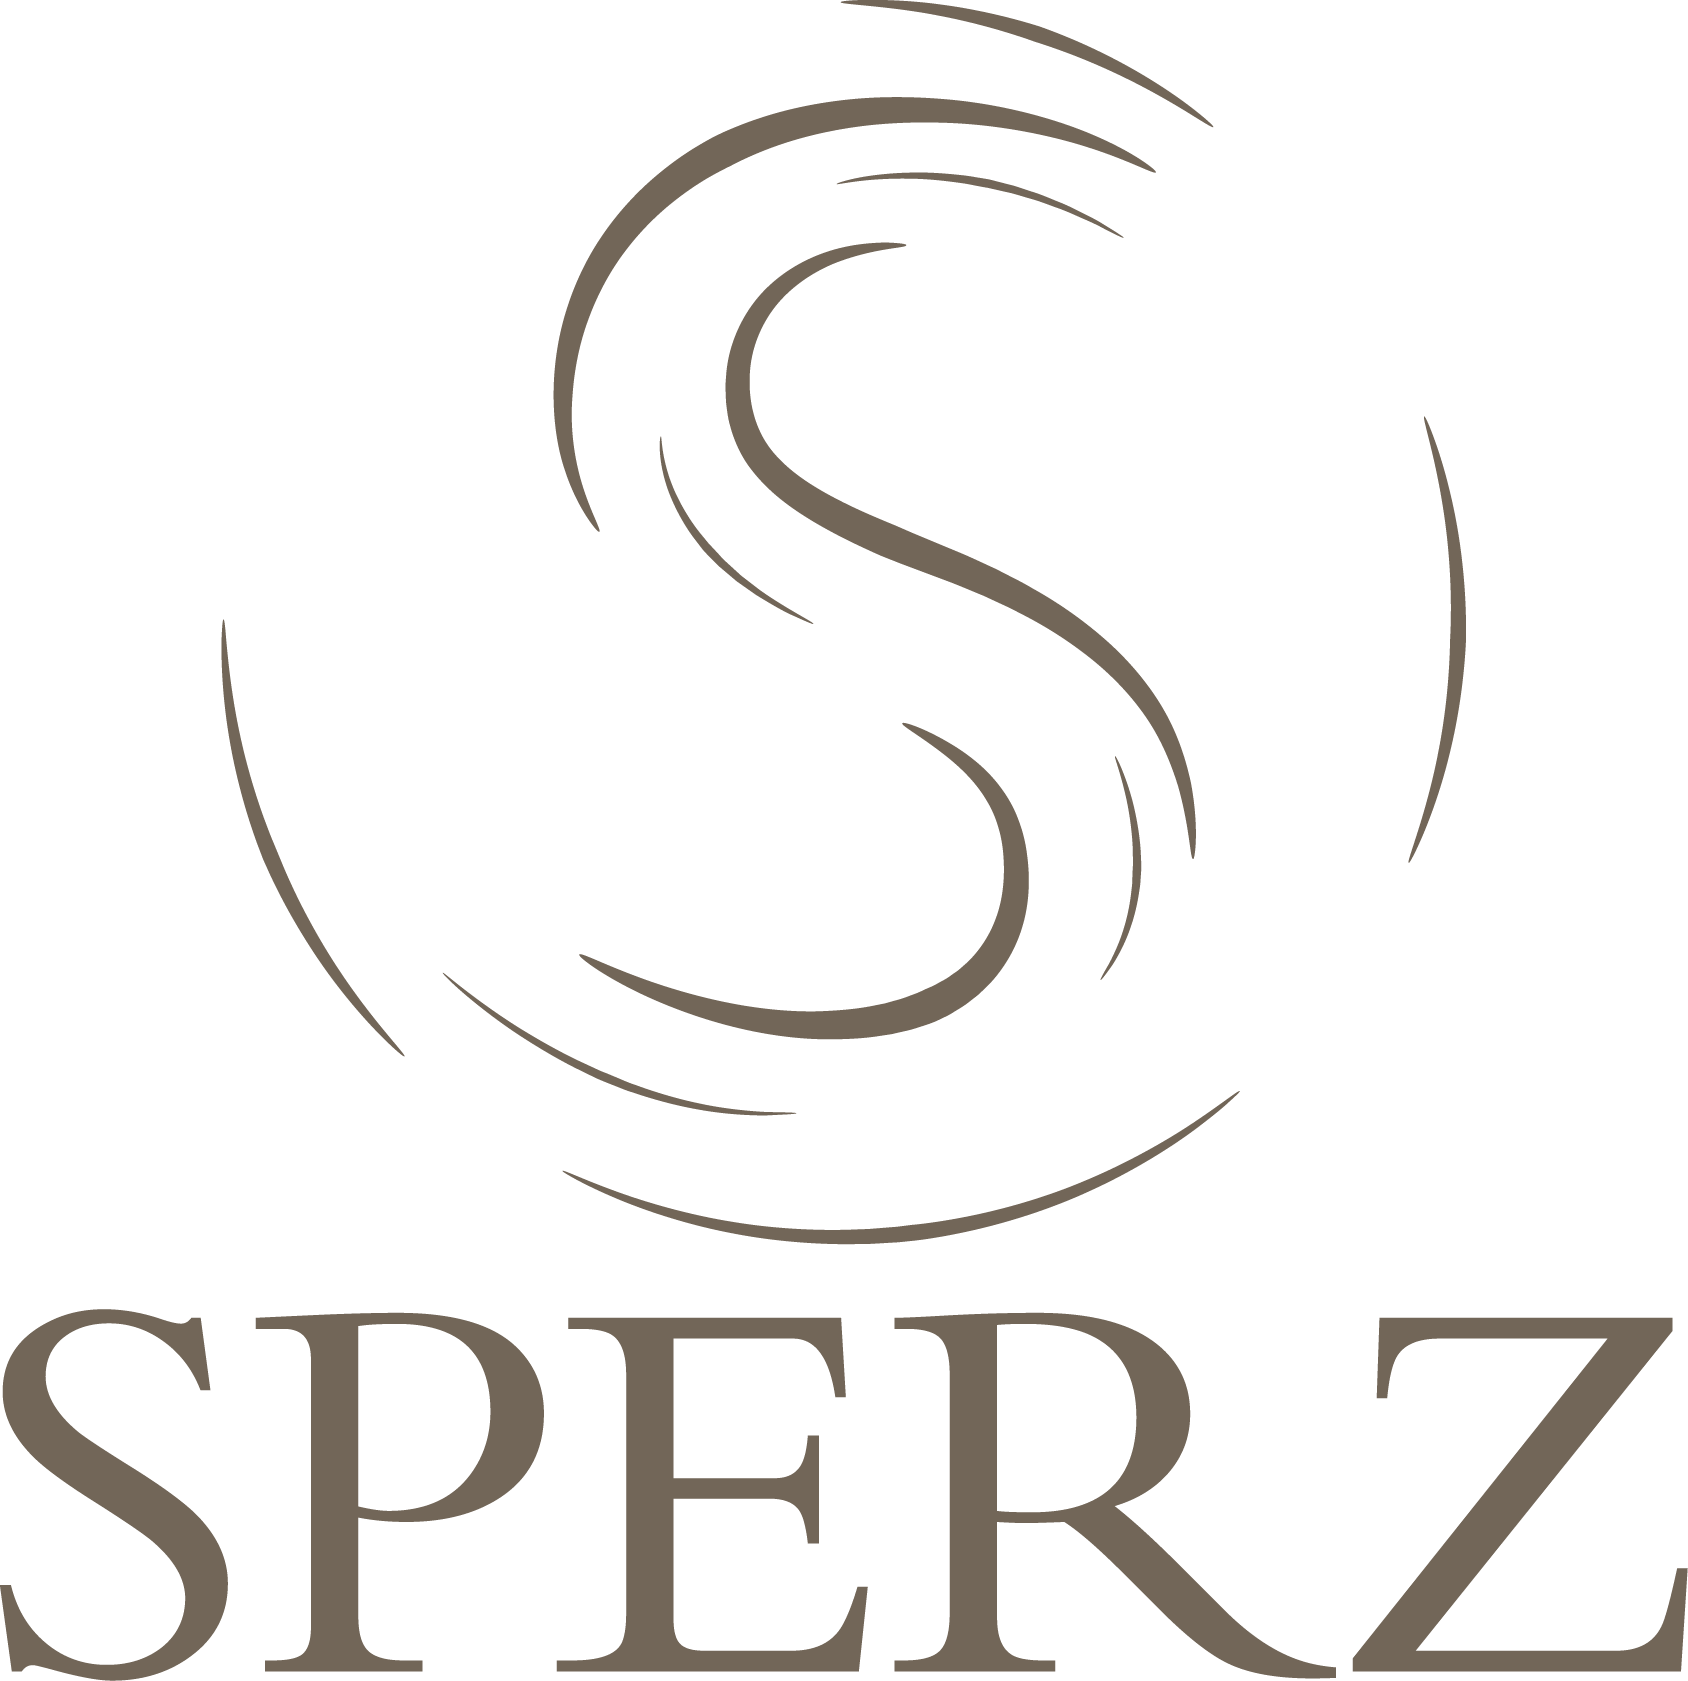 sperz.com is for sale